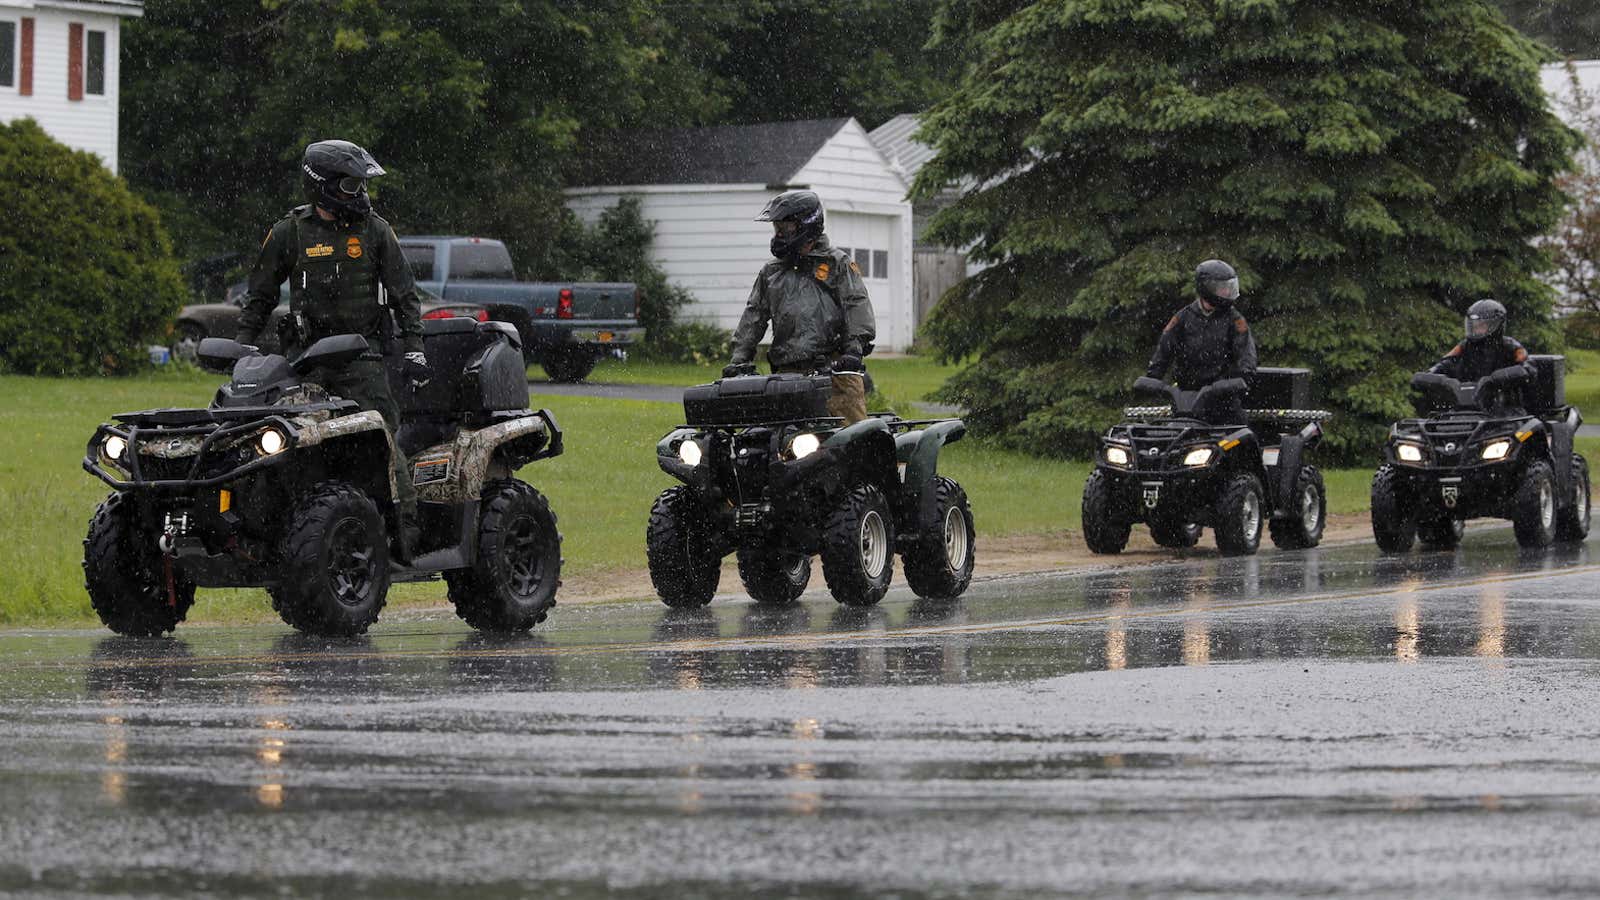 Law enforcement agents search for two recently-escaped prisoners near Cadyville, New York.